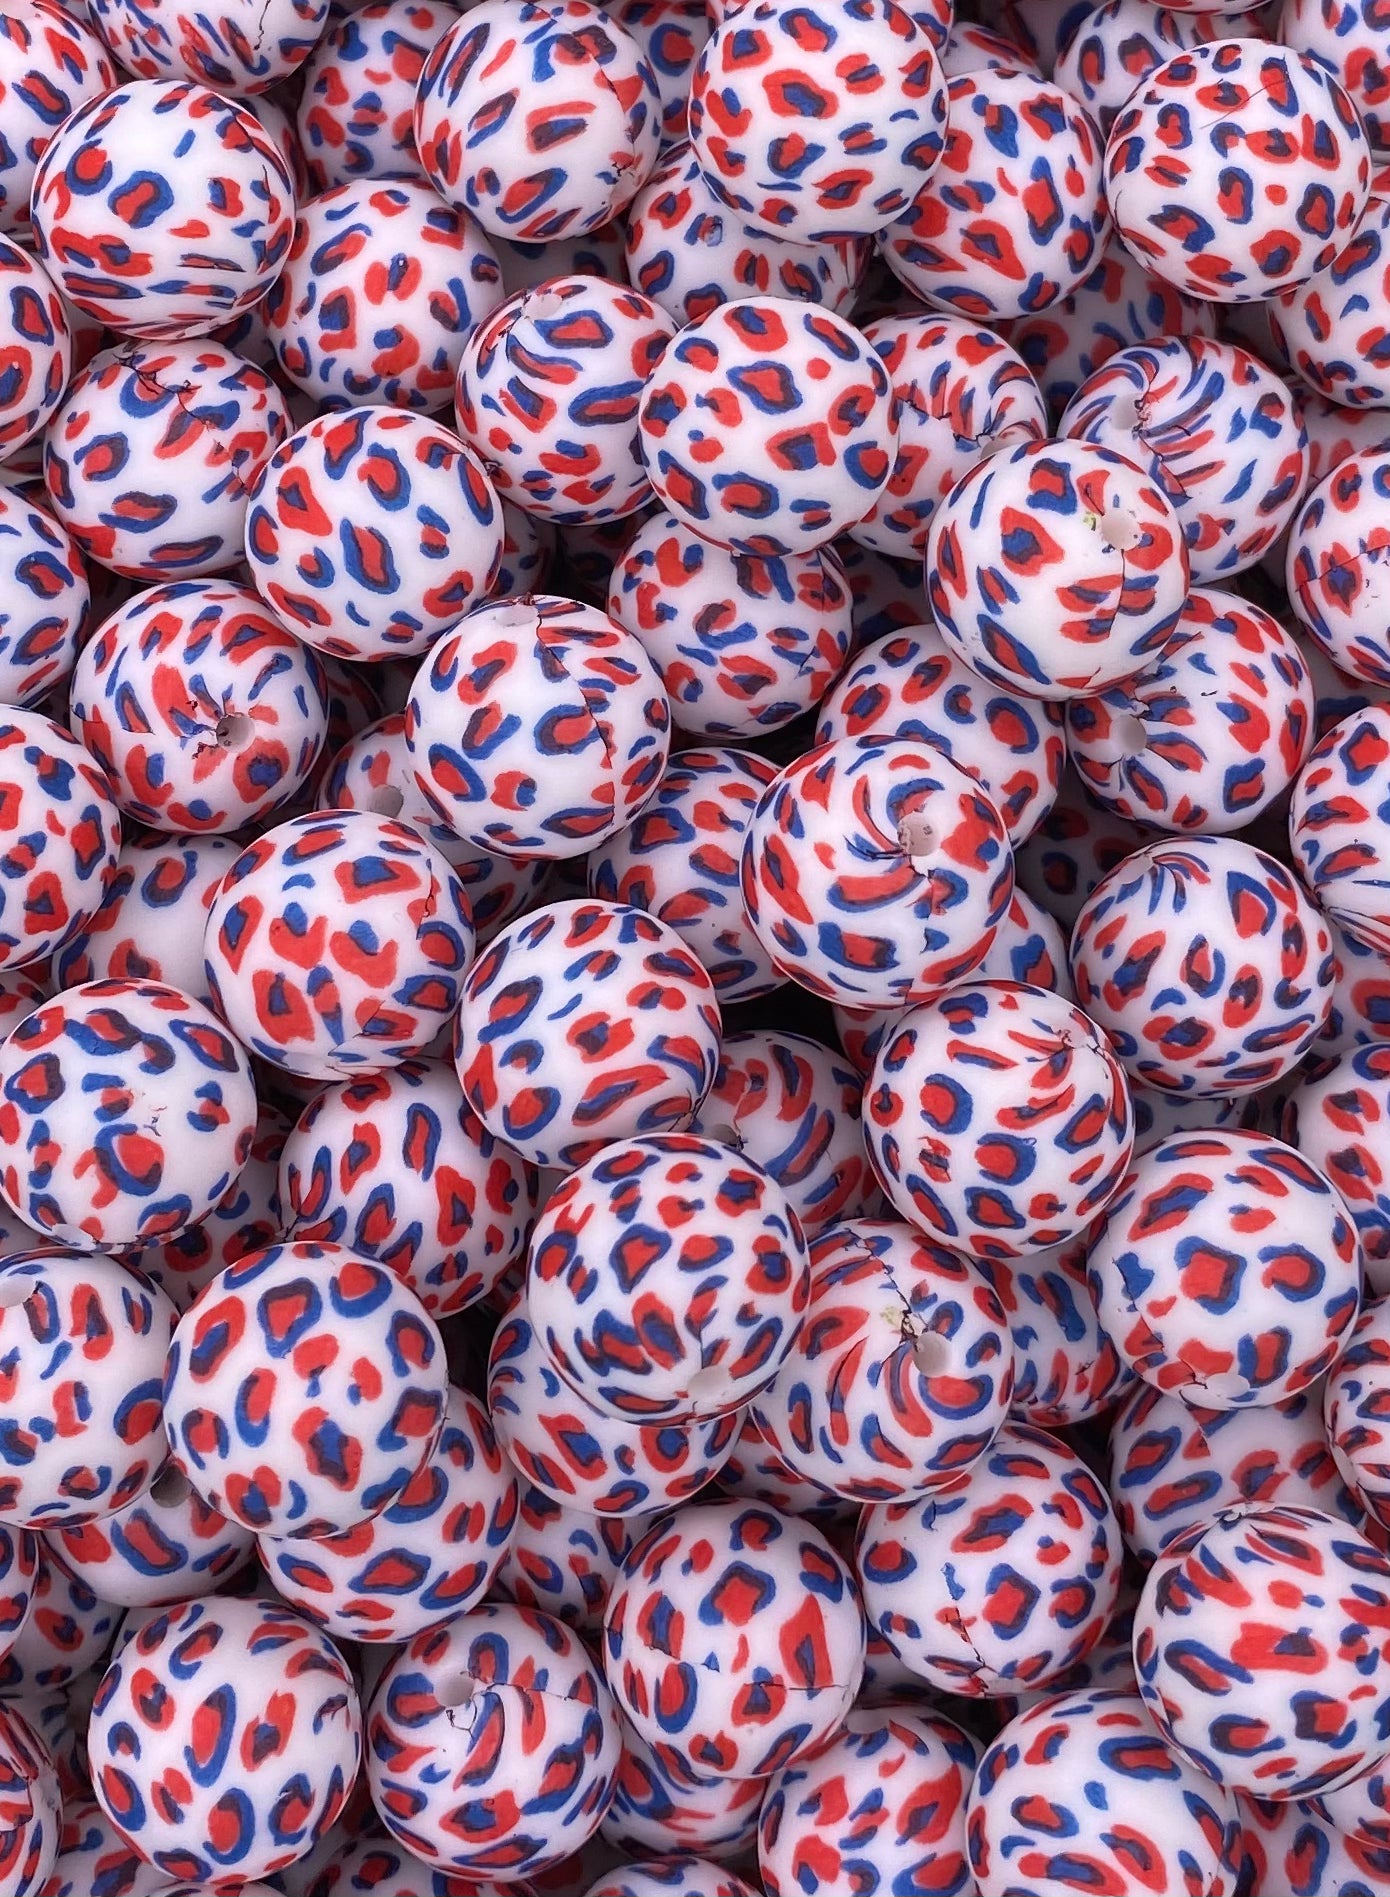 CTS Creation: American Leopard Printed 15mm Bead